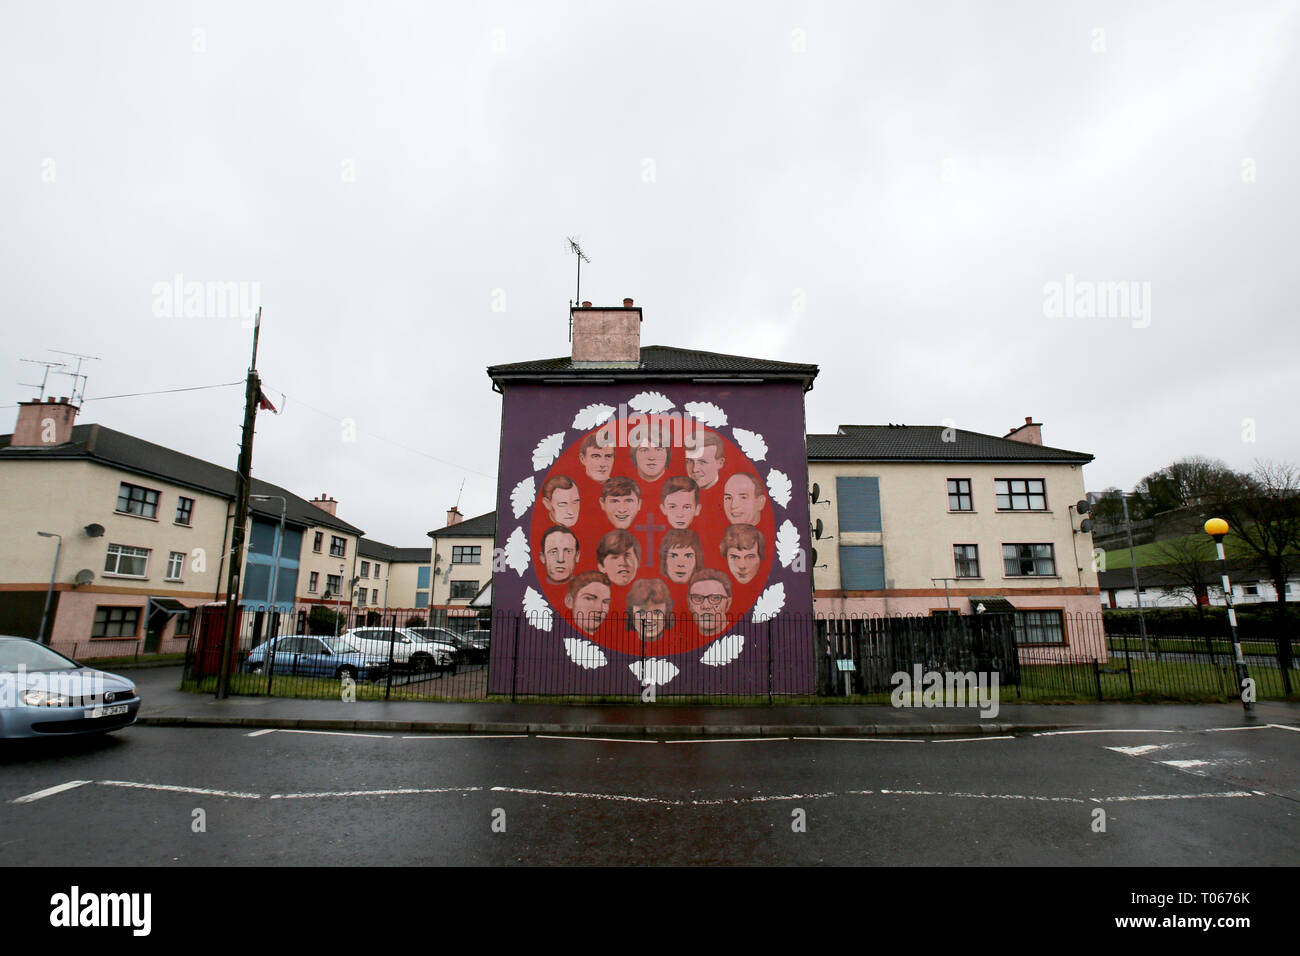 Londonderry, Northern Ireland. 16th Mar 2019. The above mural contains portraits of the 14 people who were killed by the British Army on 'Bloody Sunday' in Derry on 30 January 1972. In addition to the portraits, there are also 14 oak leaves with each leaf symbolising one of the victims, March 16, 2019. - Bloody Sunday, sometimes called the Bogside Massacre, was an incident on 30 January 1972 in the Bogside area of Derry, Northern Ireland, when British soldiers shot 28 unarmed civilians during a protest march against internment. Credit: Irish Eye/Alamy Live News Stock Photo